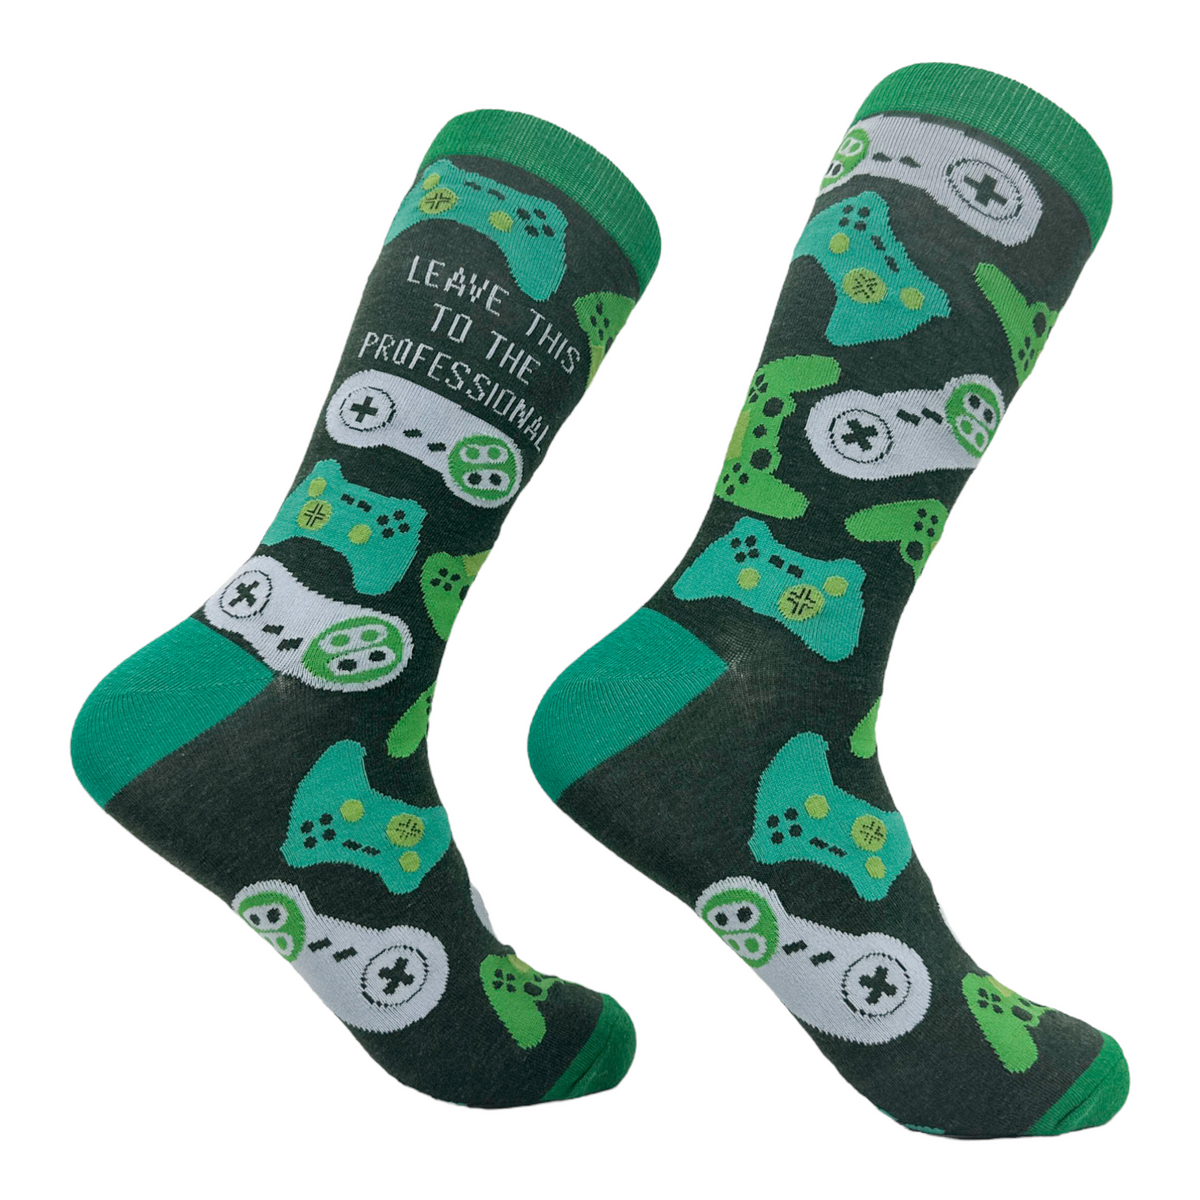 Funny To The Professional Funny Gaming Sock Nerdy Video Games Tee